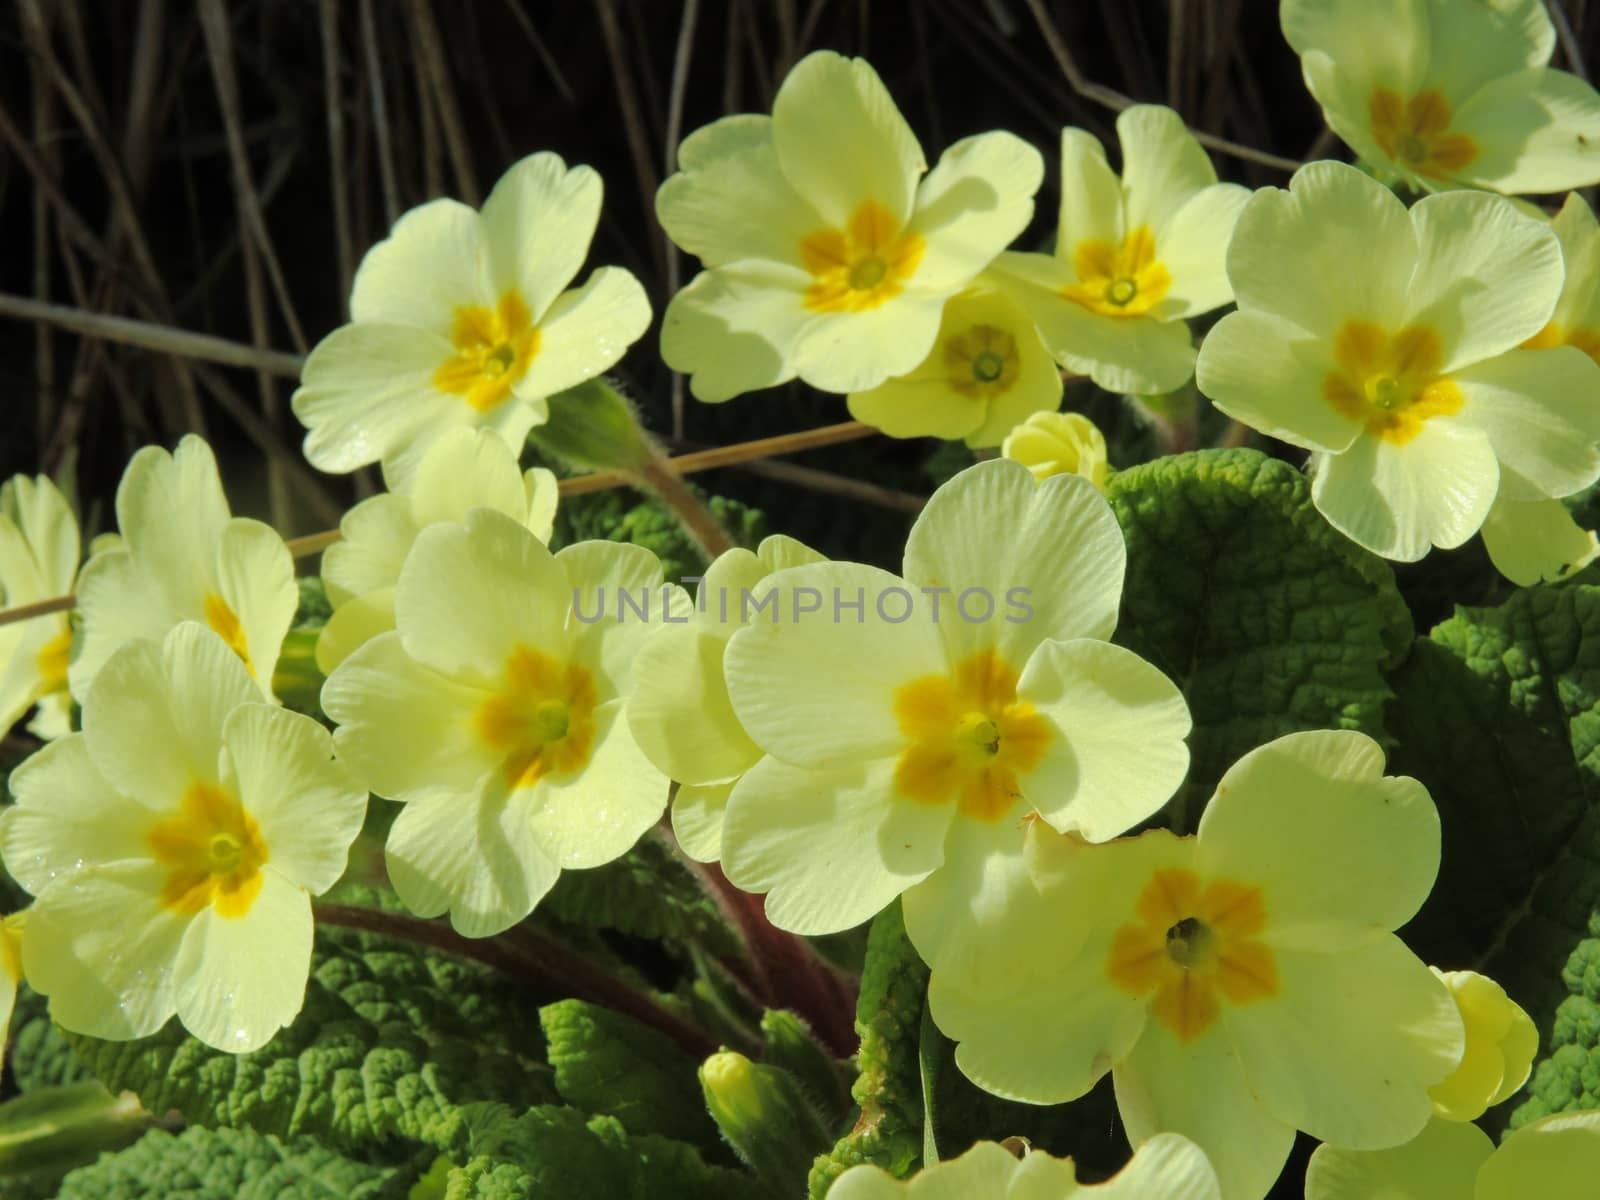 A close-up image of colourful Wild Primroses.